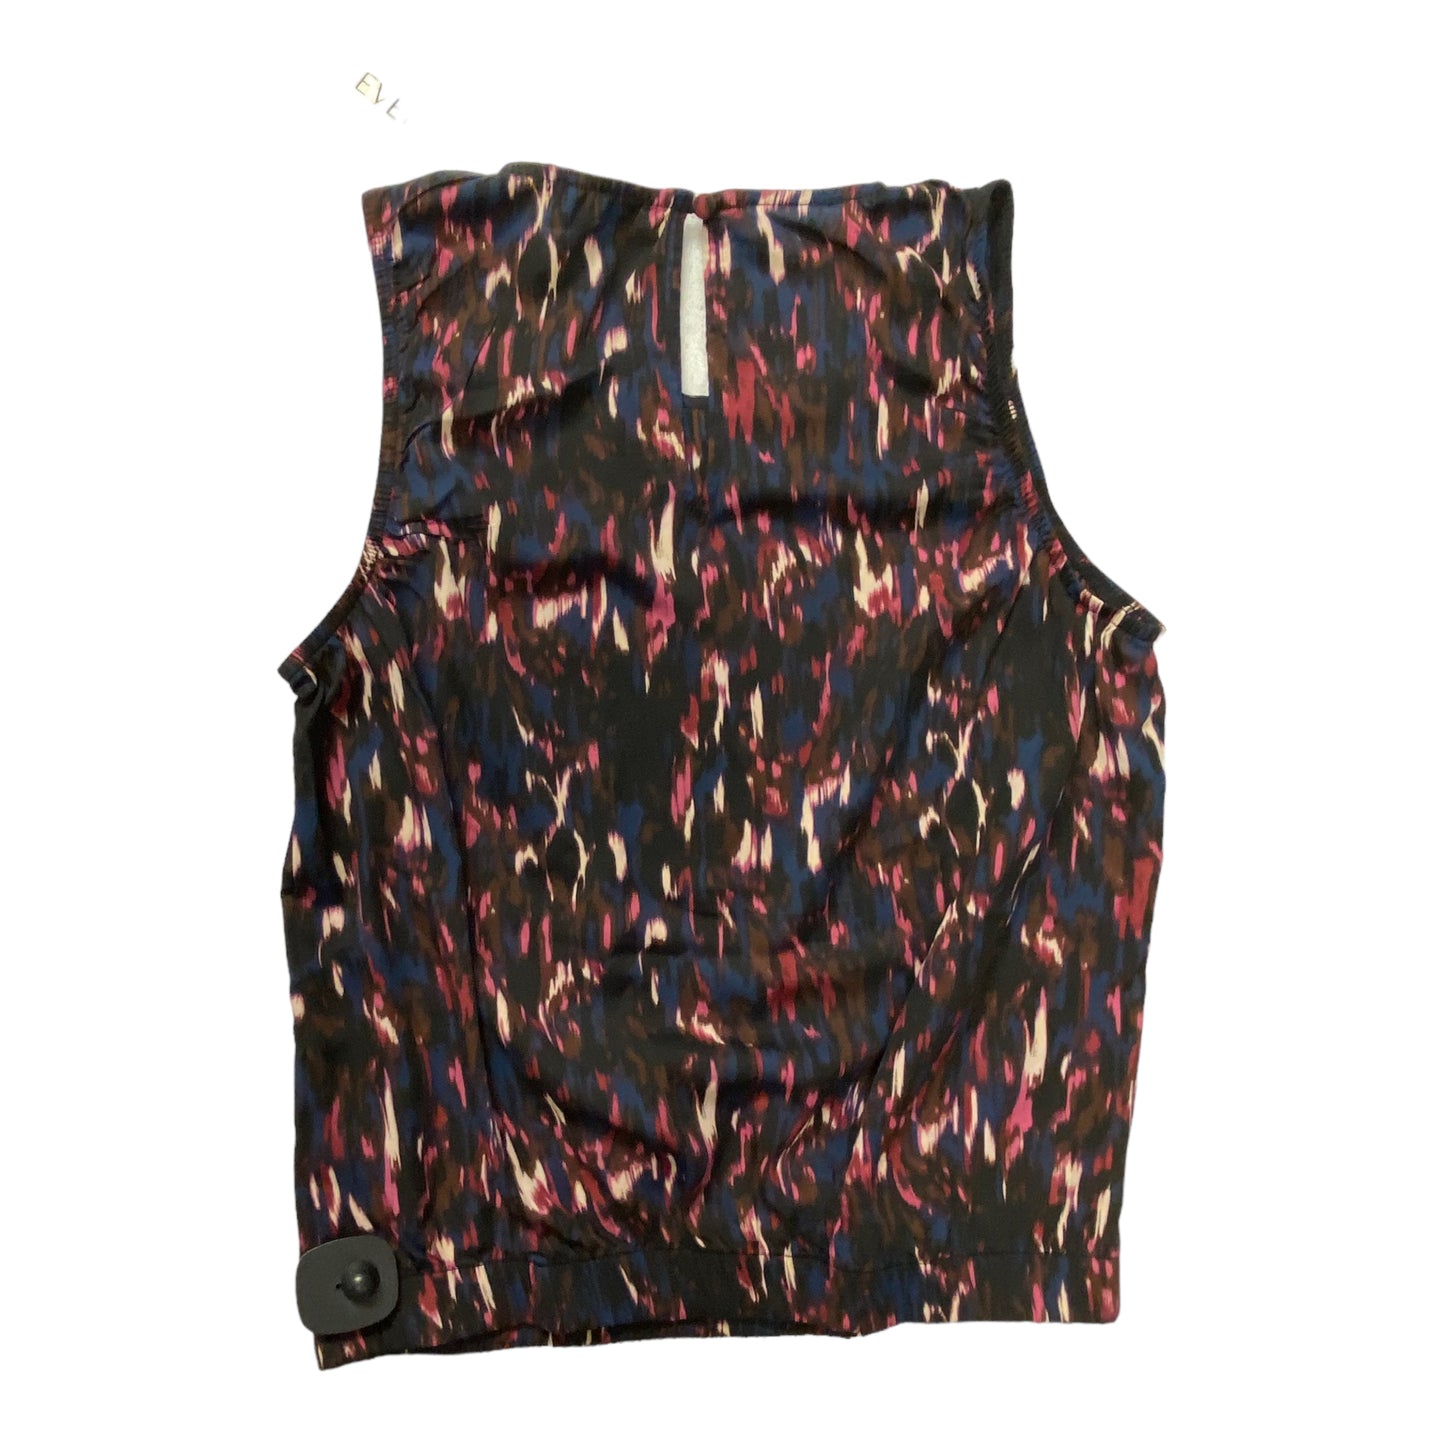 Multi-colored Top Sleeveless Evereve, Size M